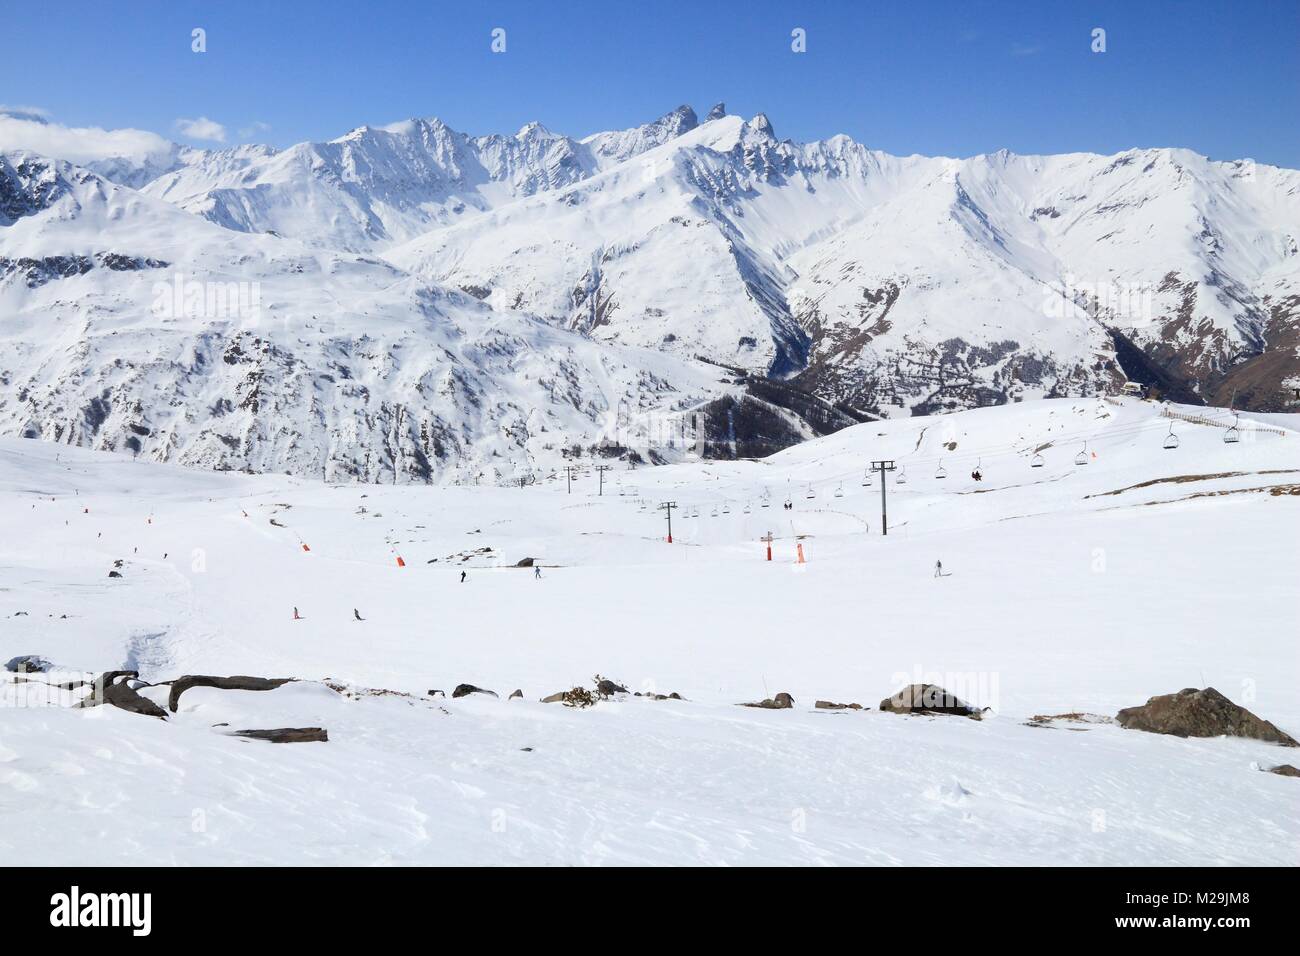 Snowy mountains and ski lifts in Alps of France. Galibier-Thabor ...